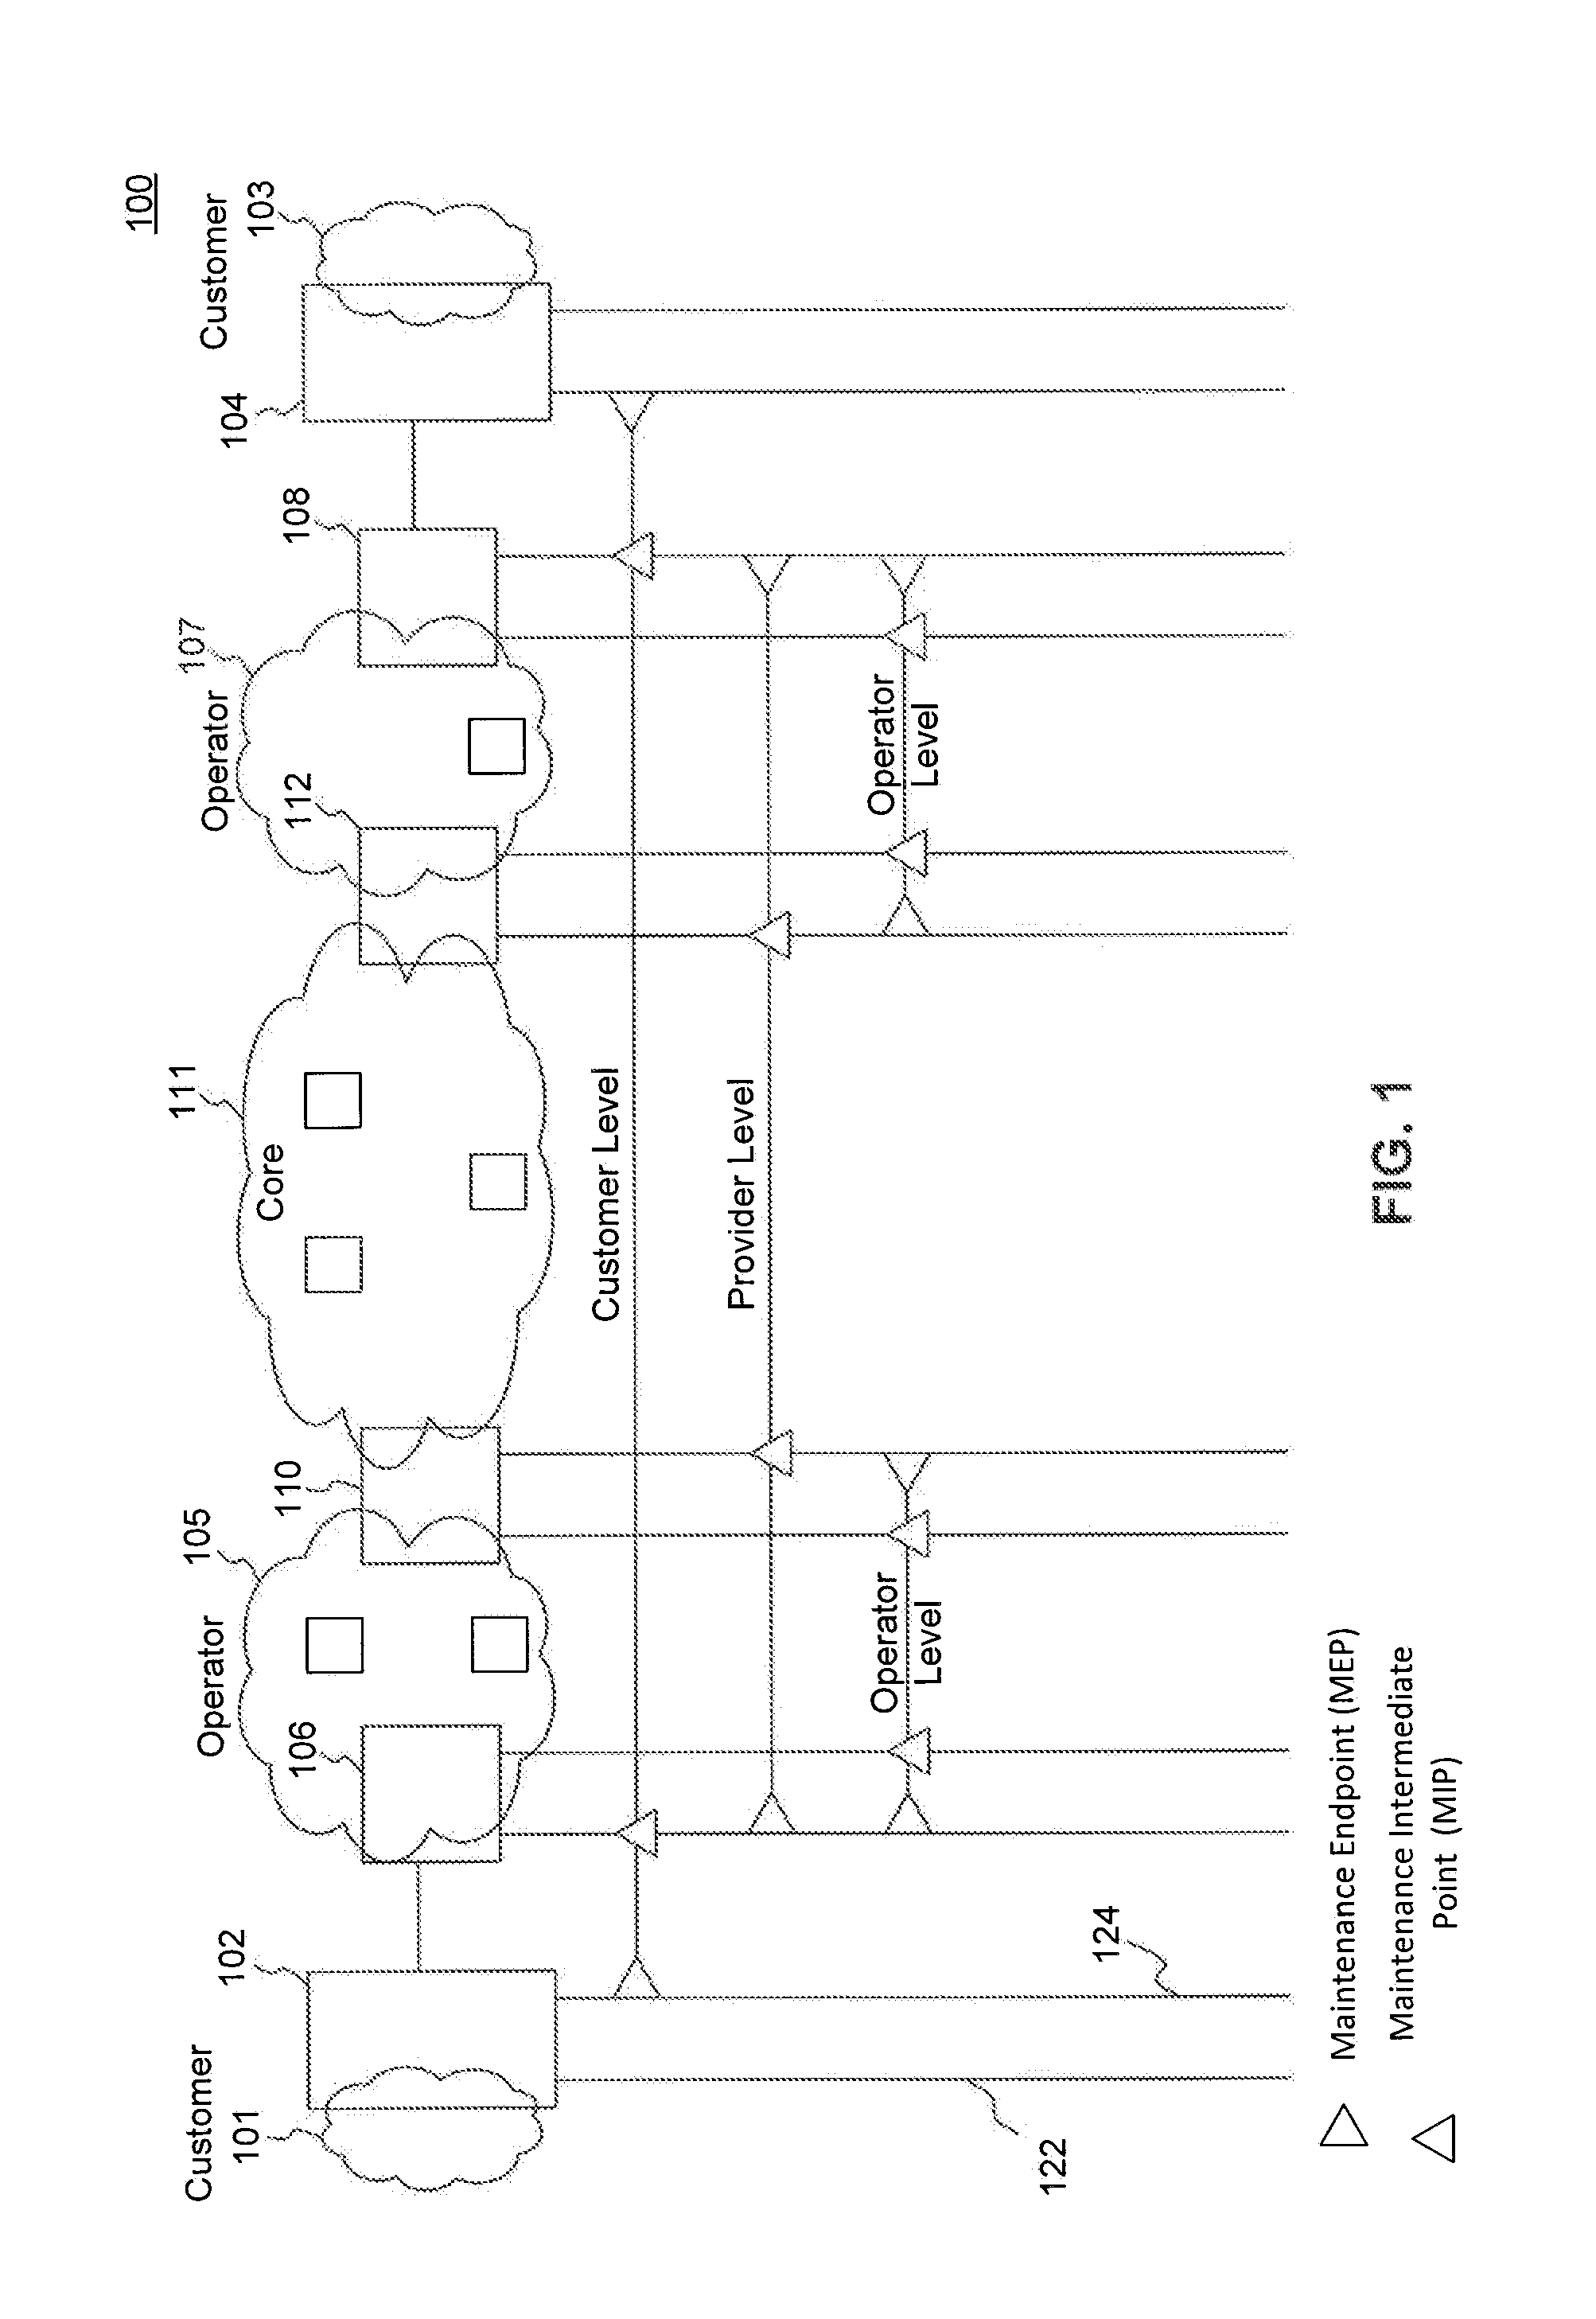 Ethernet Operation and Maintenance (OAM) with Flexible Forwarding